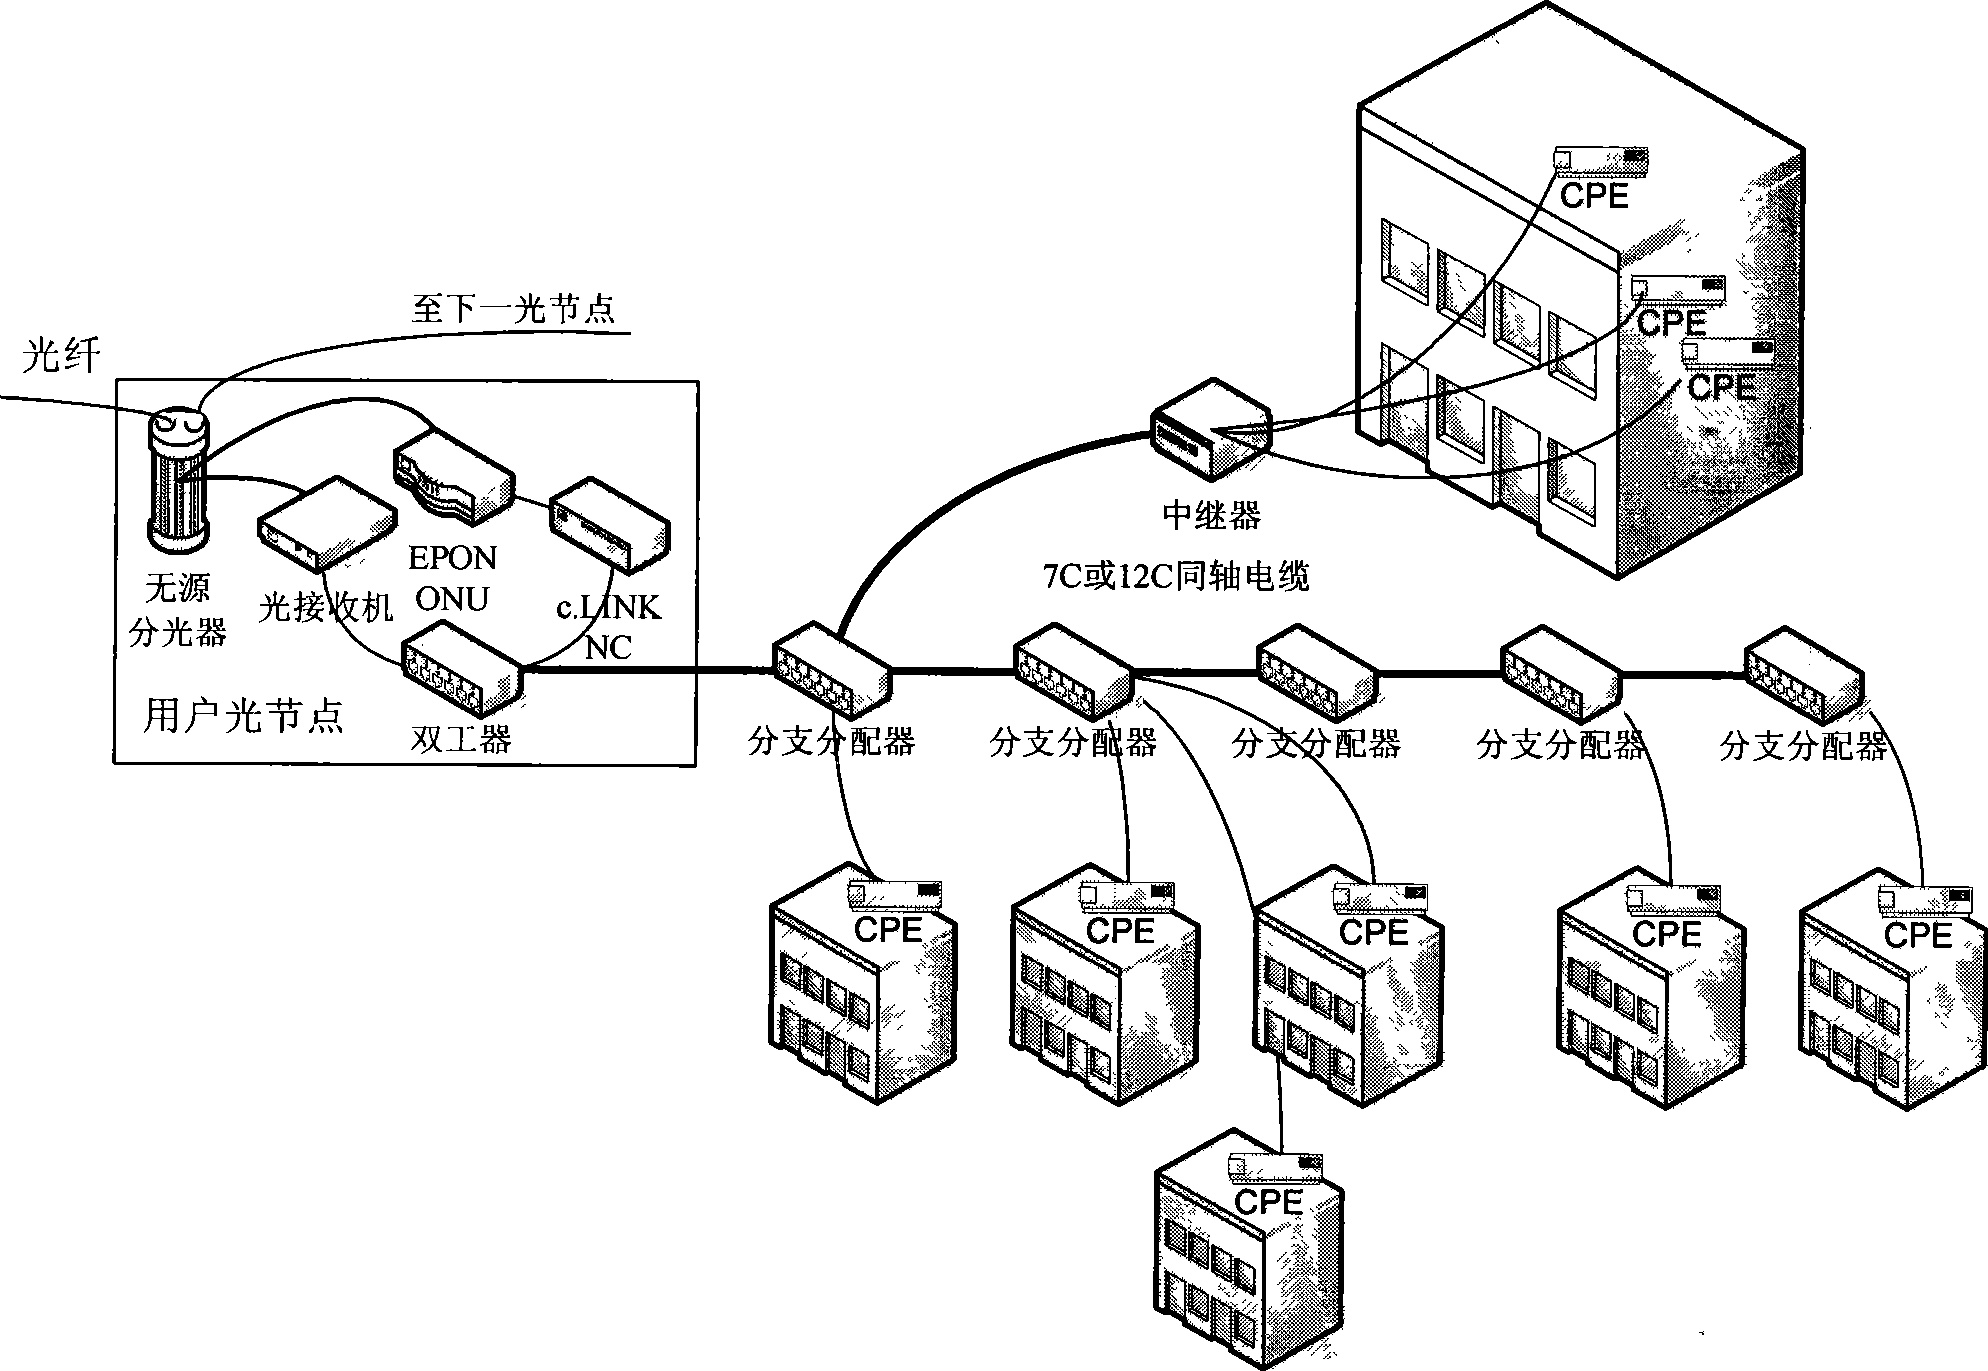 Coaxial cable access and networking method based on HFC network